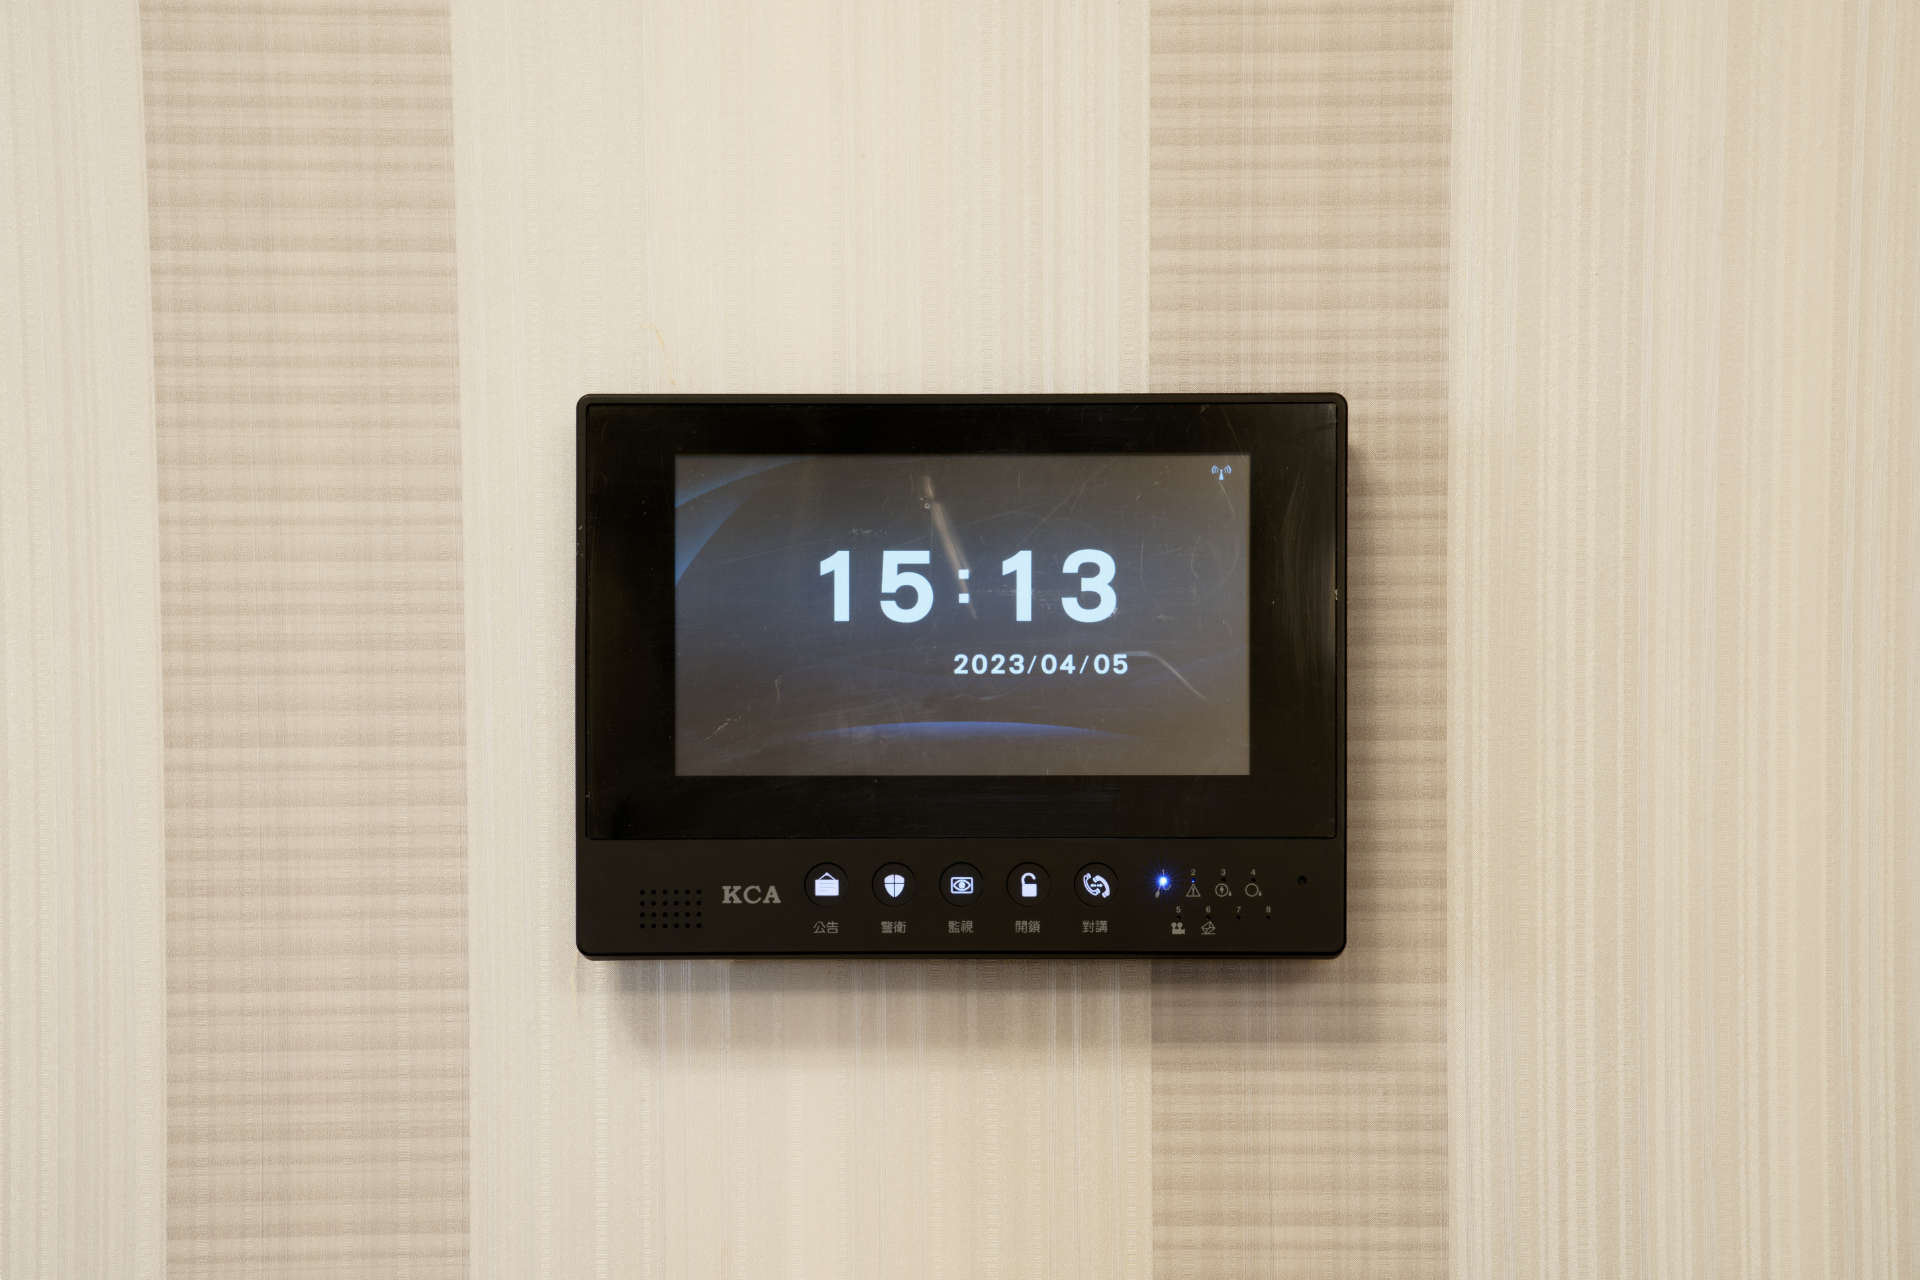 A wall-mounted security monitor displaying the date and time.